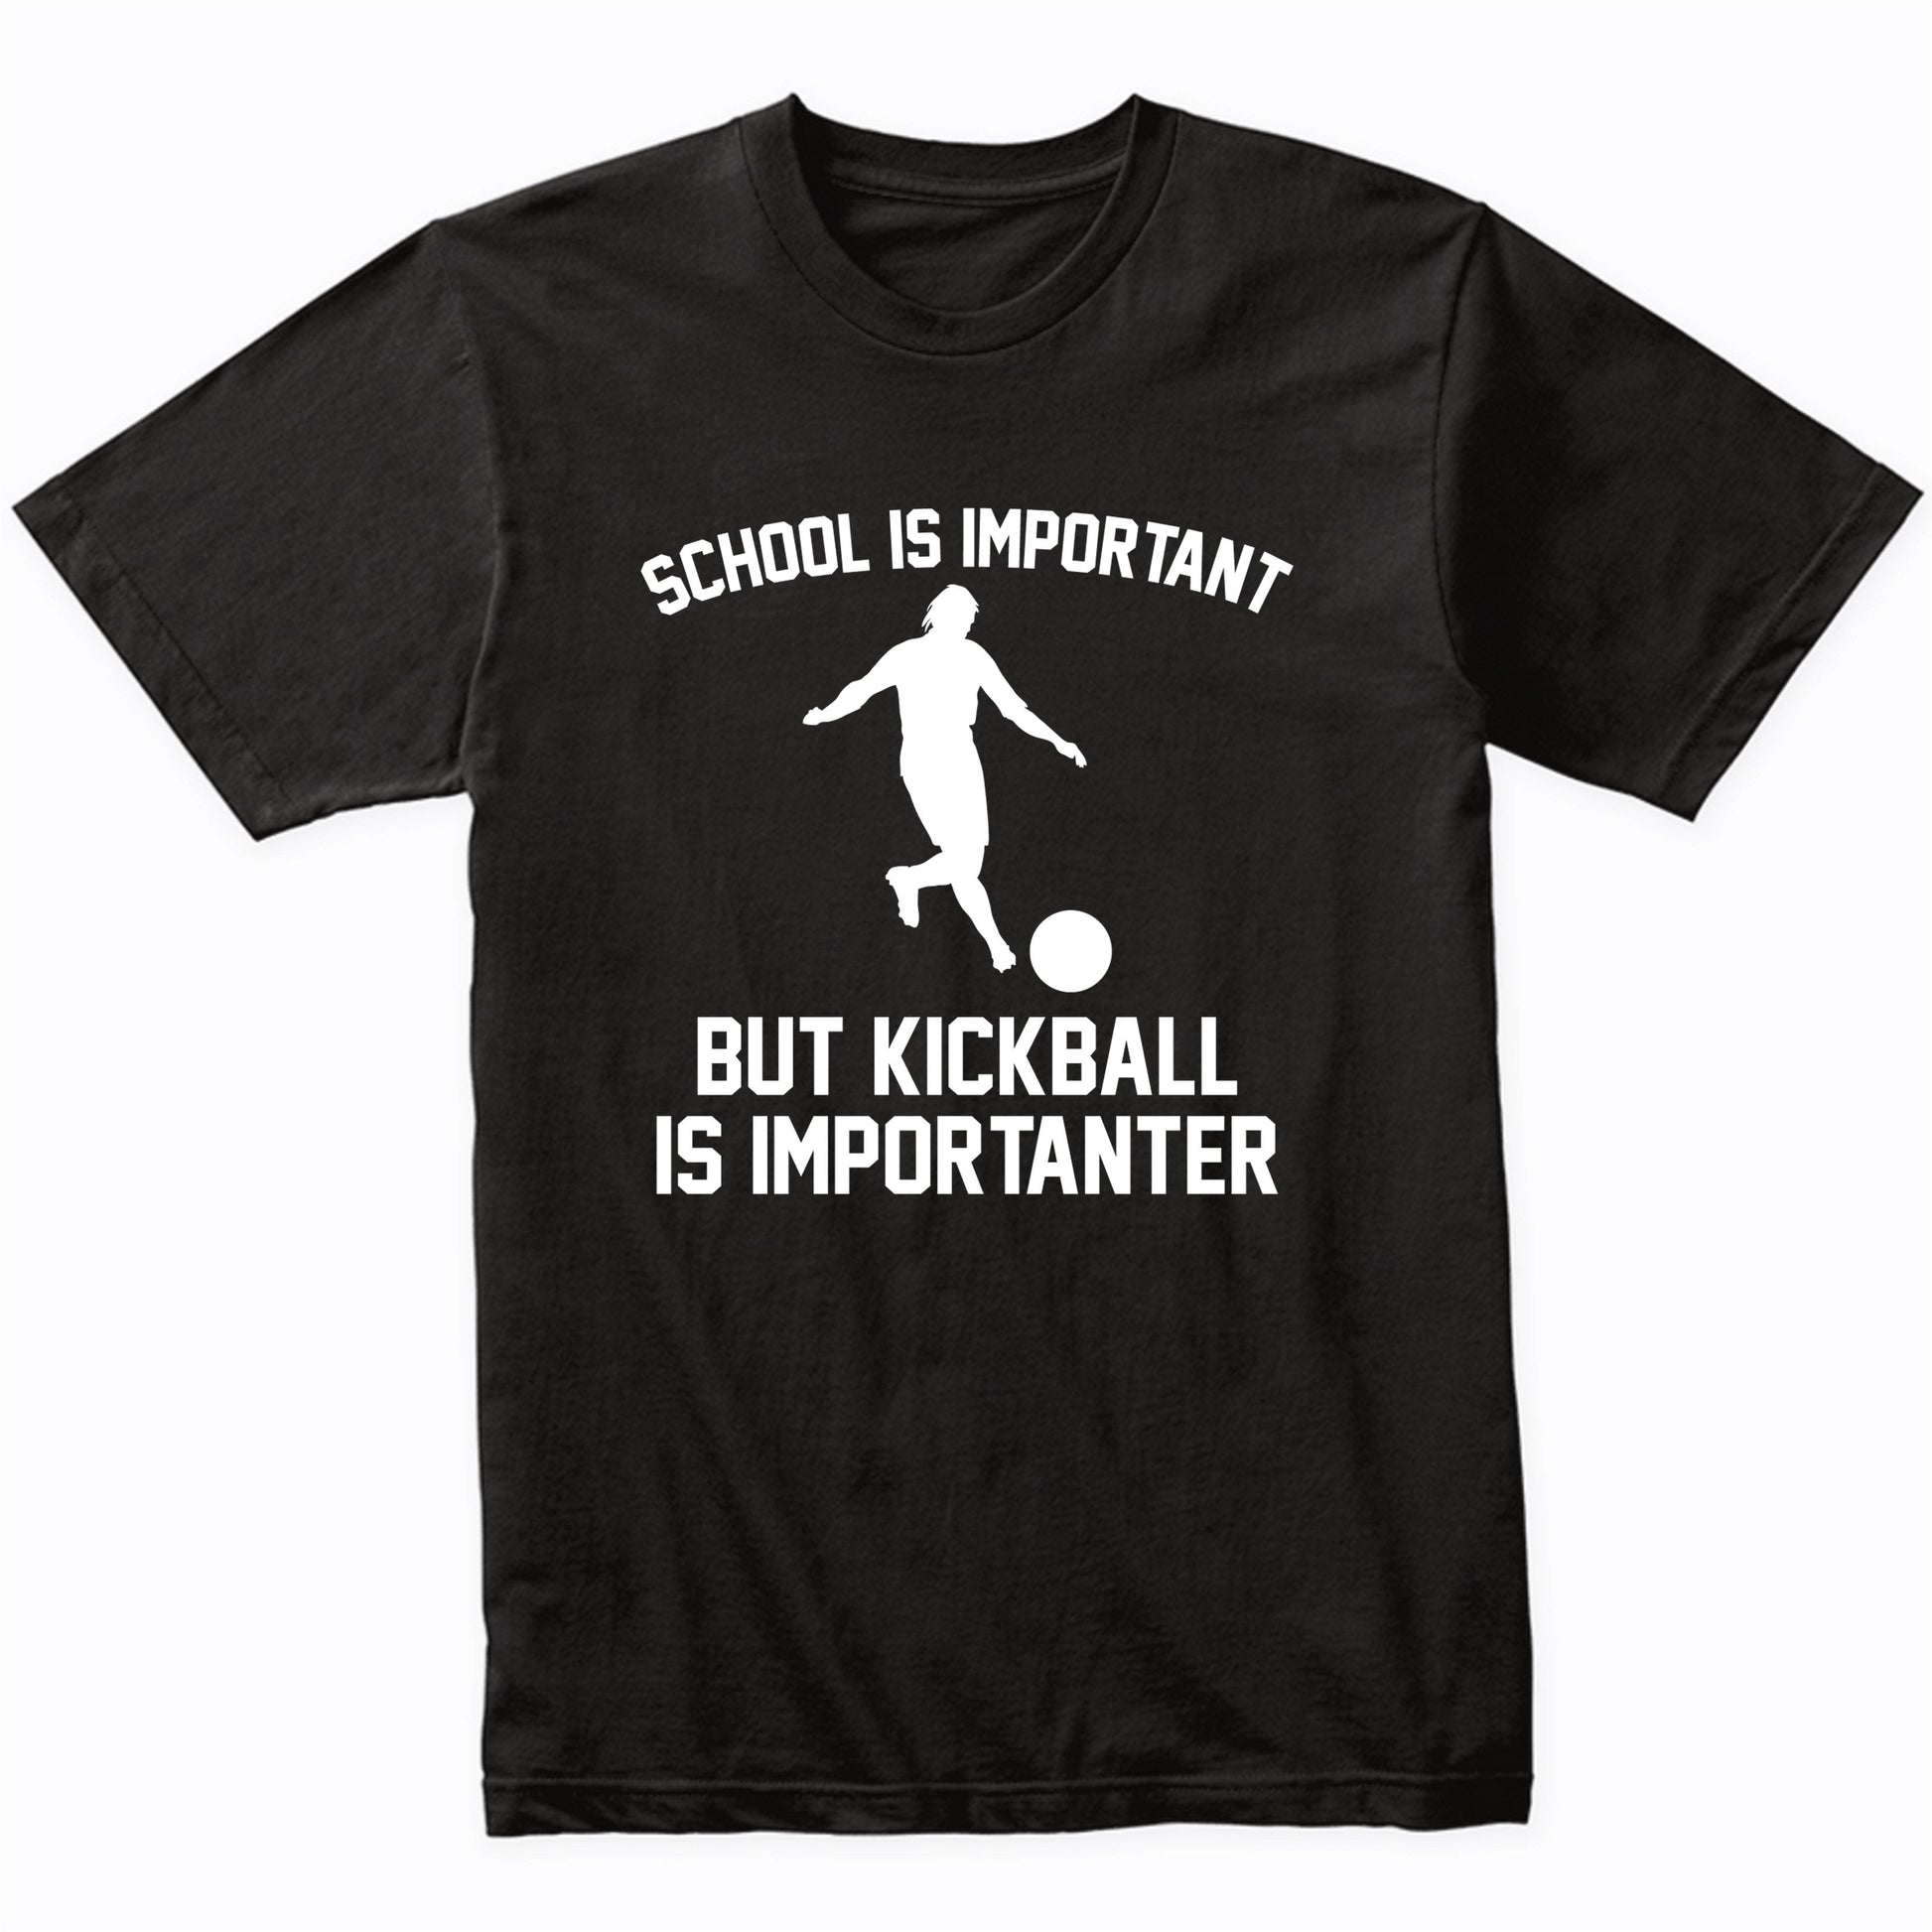 School Is Important But Kickball Is Importanter Funny Shirt